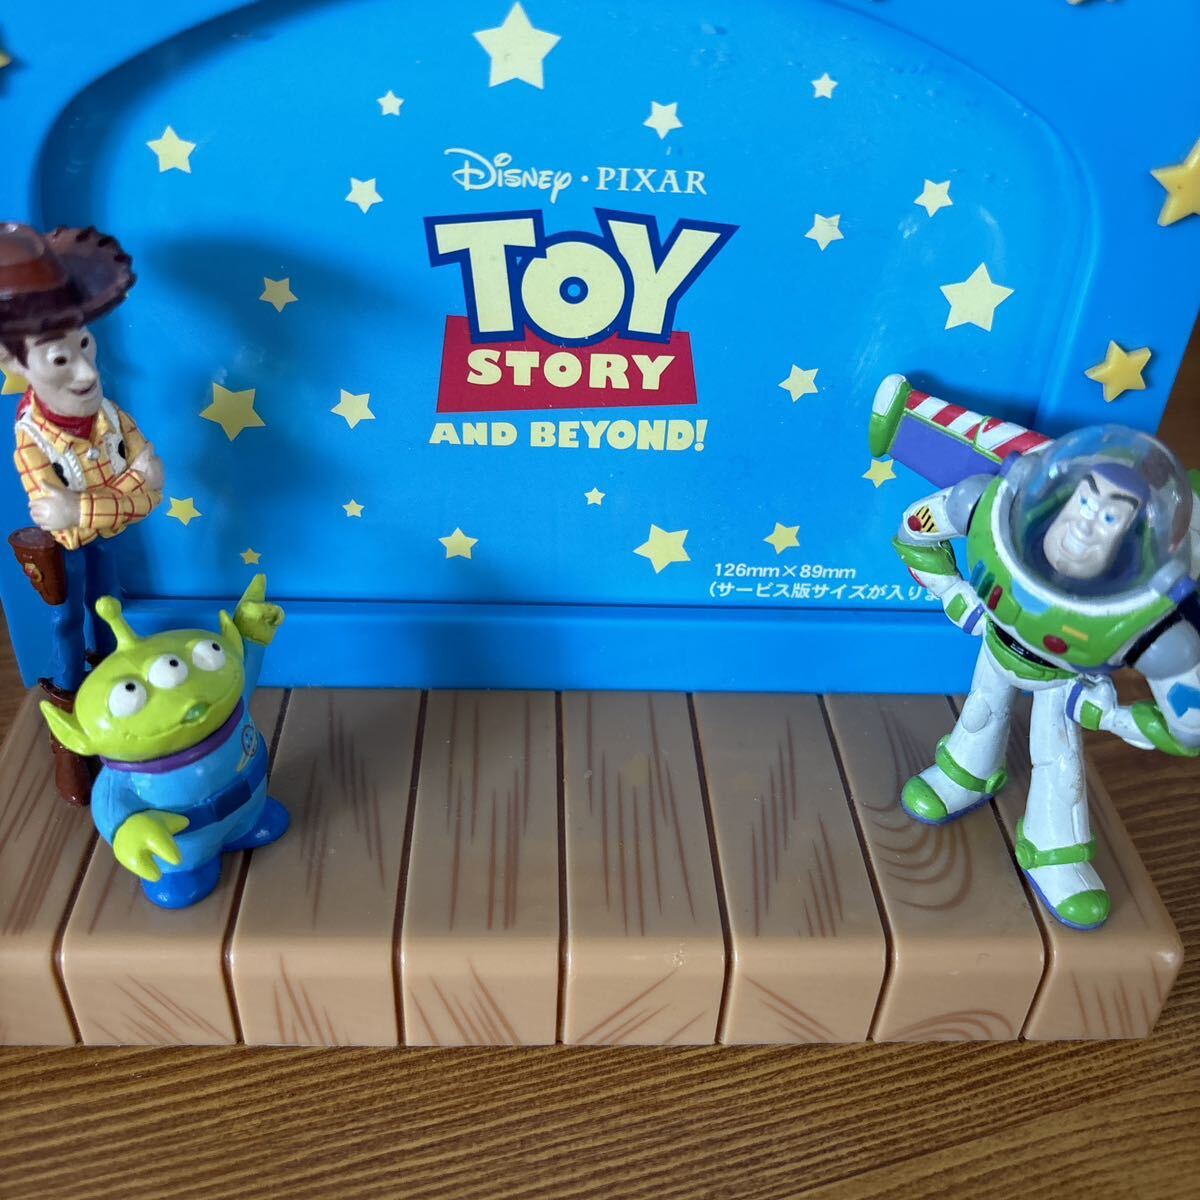  Disney Toy Story Stitch Mickey chip . Dale photograph length memory stand ceramics ornament that time thing figure 